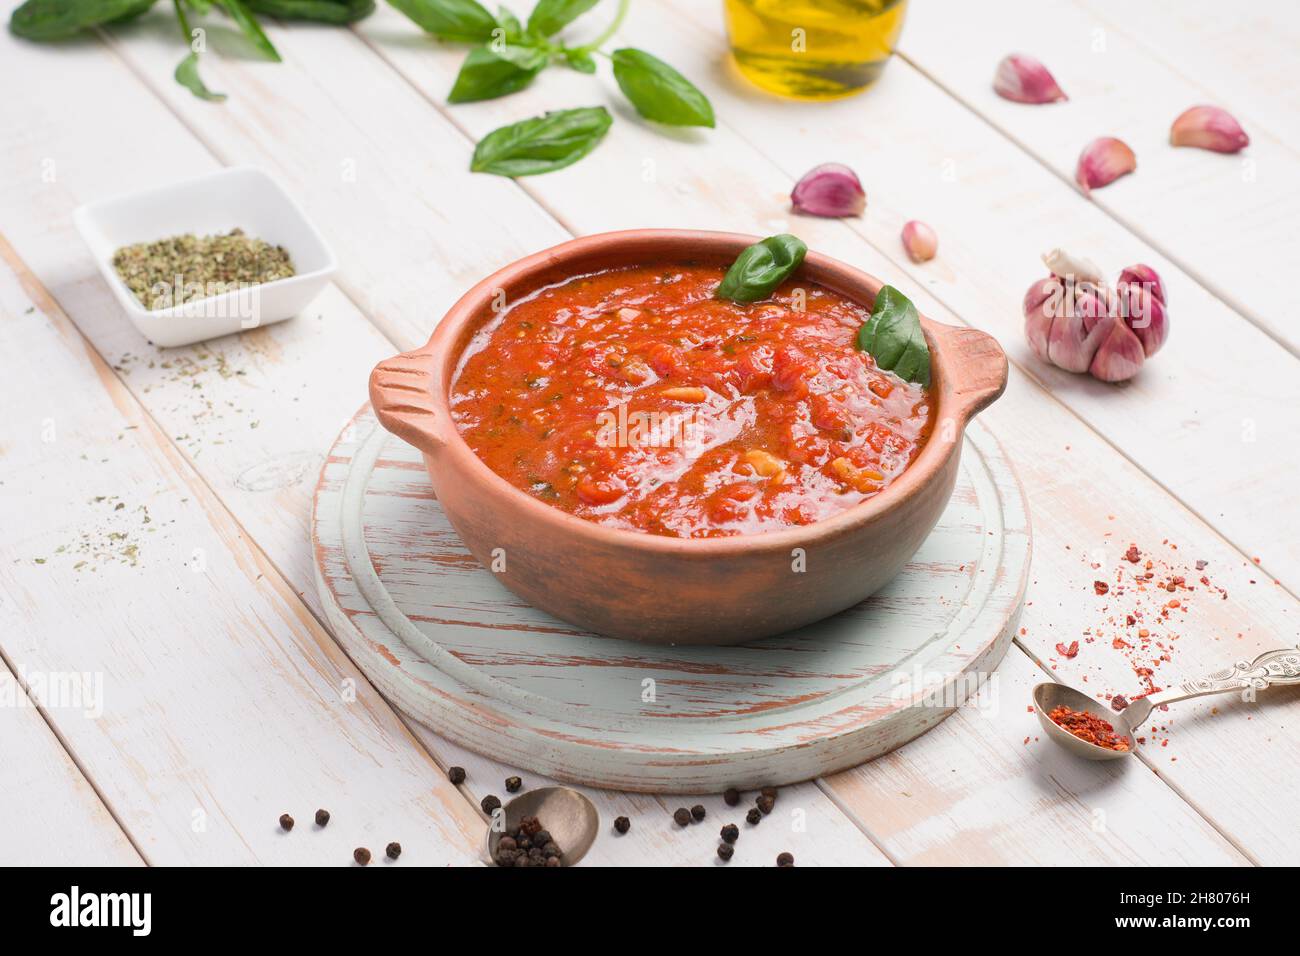 Wooden bowl of red marinara sauce made of tomato with basil leaves placed on table with olive oil and garlic Stock Photo